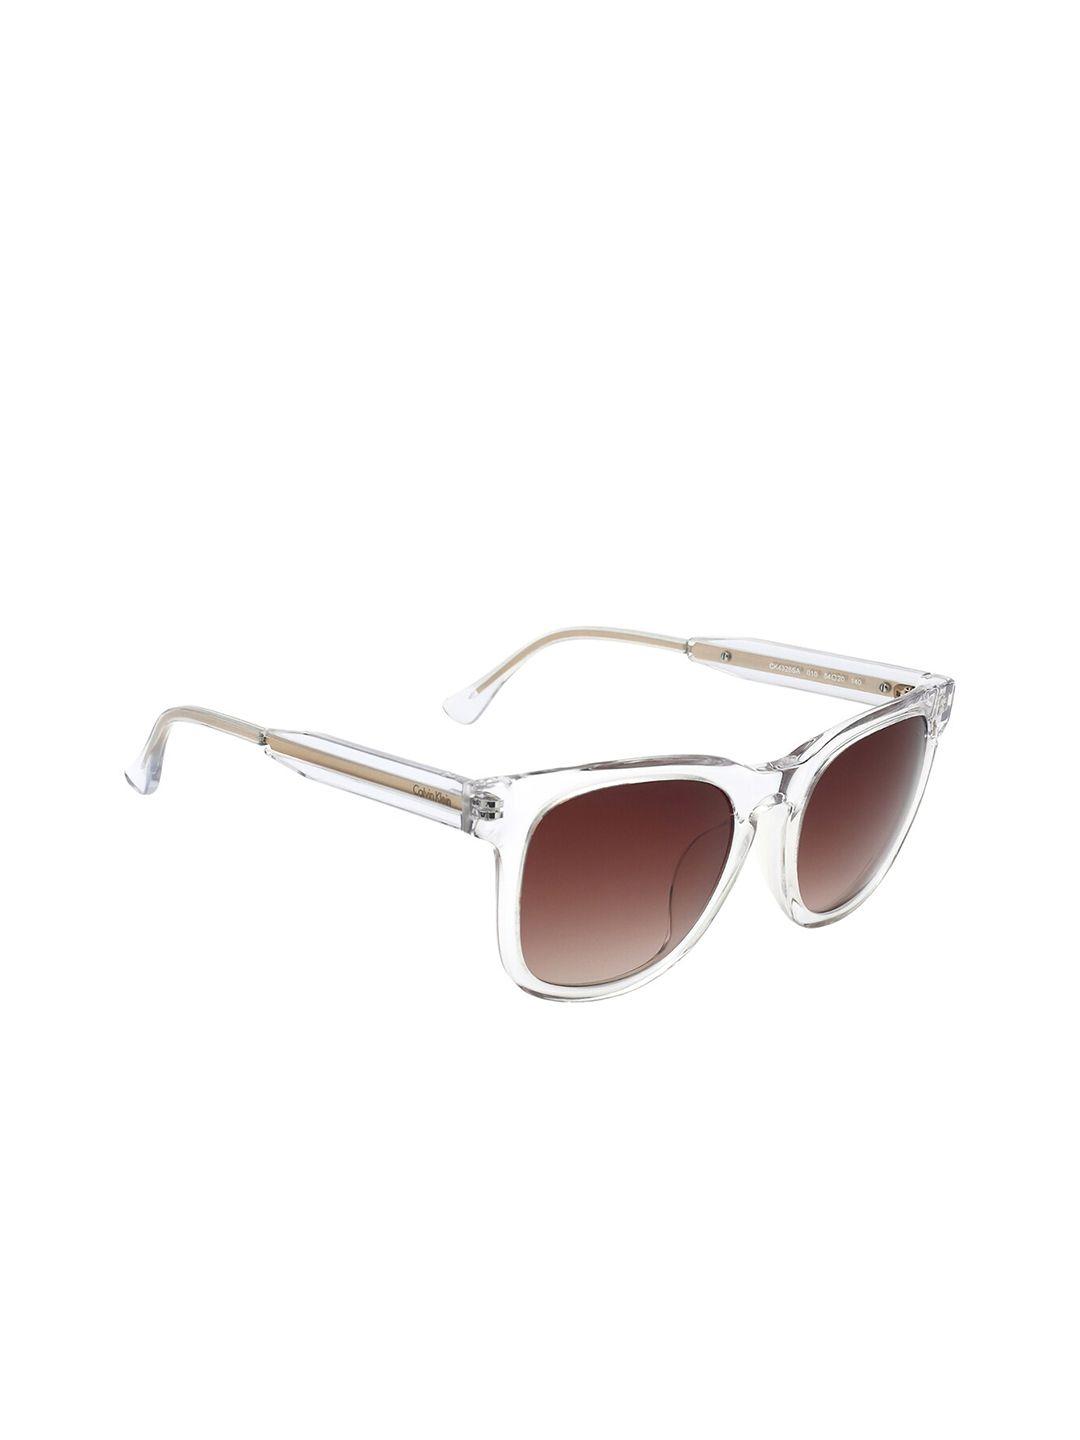 calvin klein women square sunglasses with uv protected lens